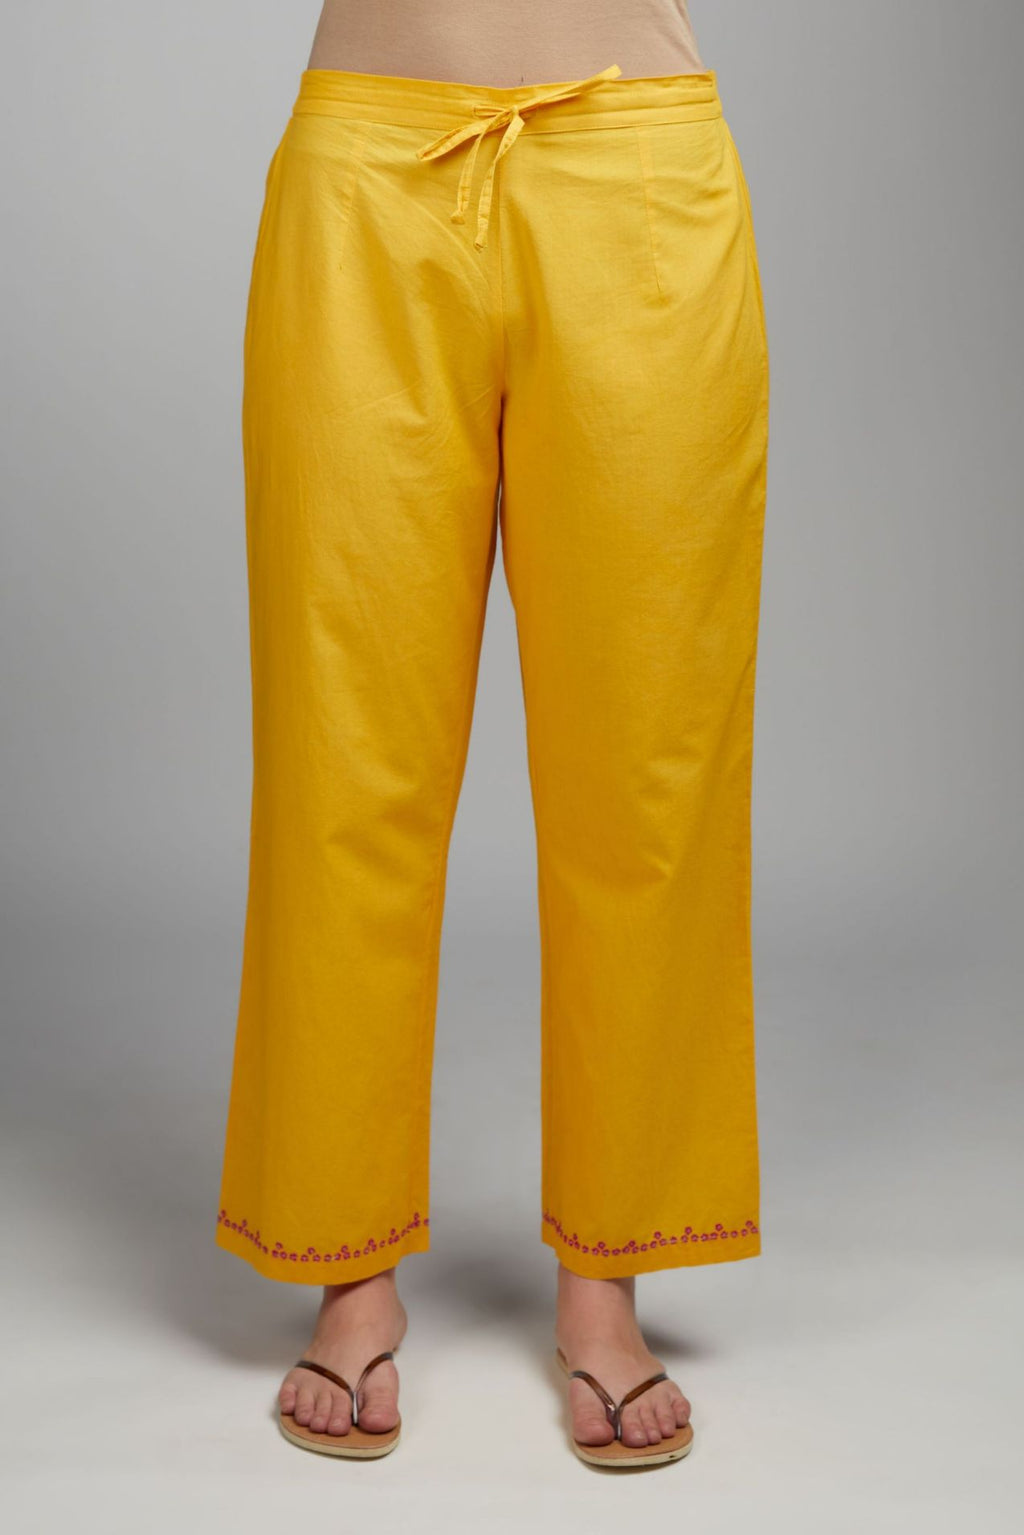 Mango yellow cotton straight pant with embroidered hem